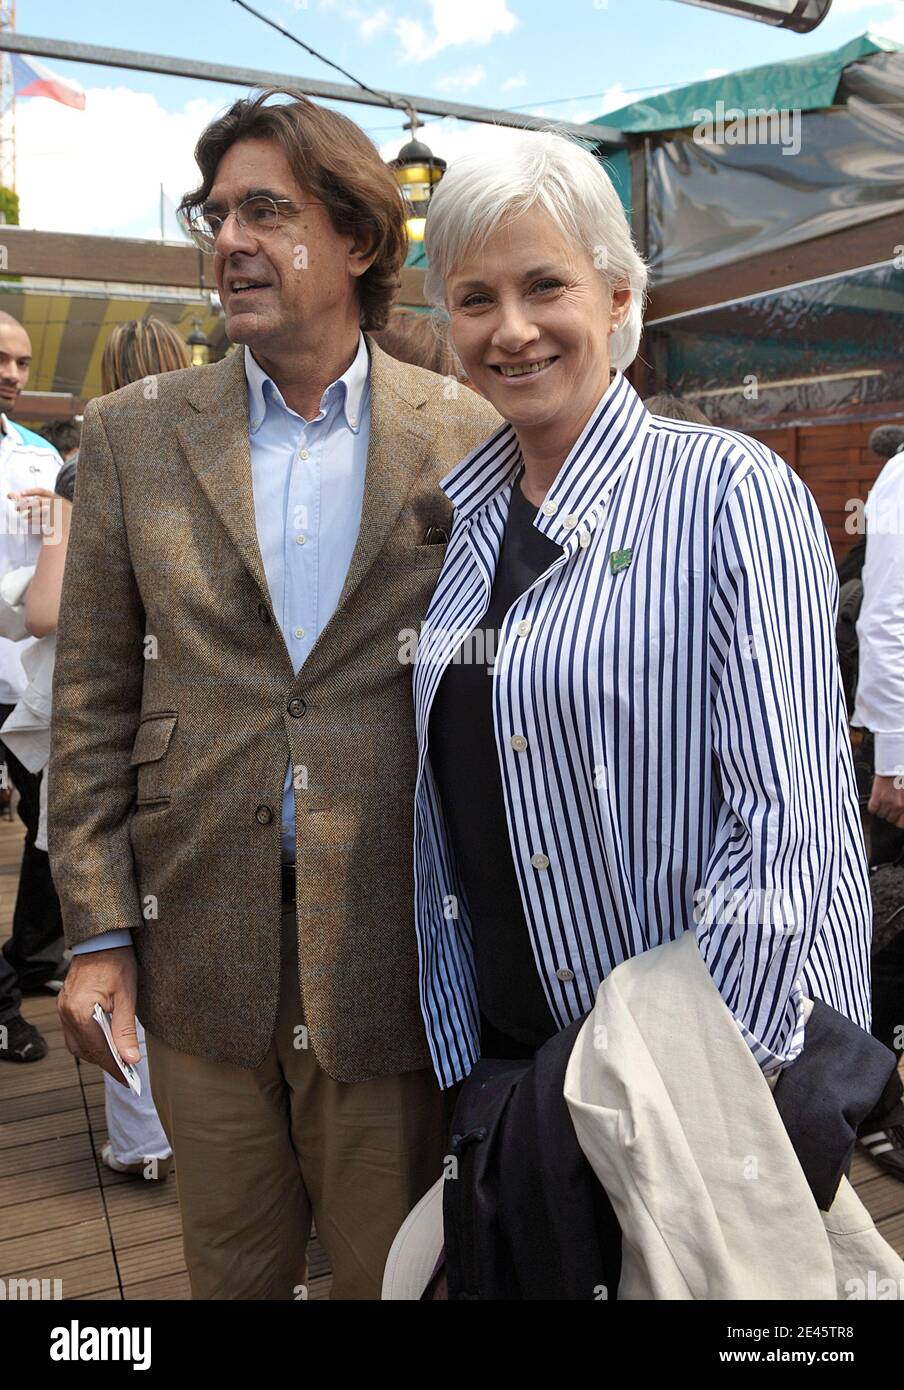 Francoise De Panafieu and Luc Ferry arriving at the VIP area 'Le Village' during the 2009 French Tennis Open at Roland Garros arena in Paris, France on June 7, 2009. Photo by Gorassini-Guignebourg/ABACAPRESS.COM Stock Photo